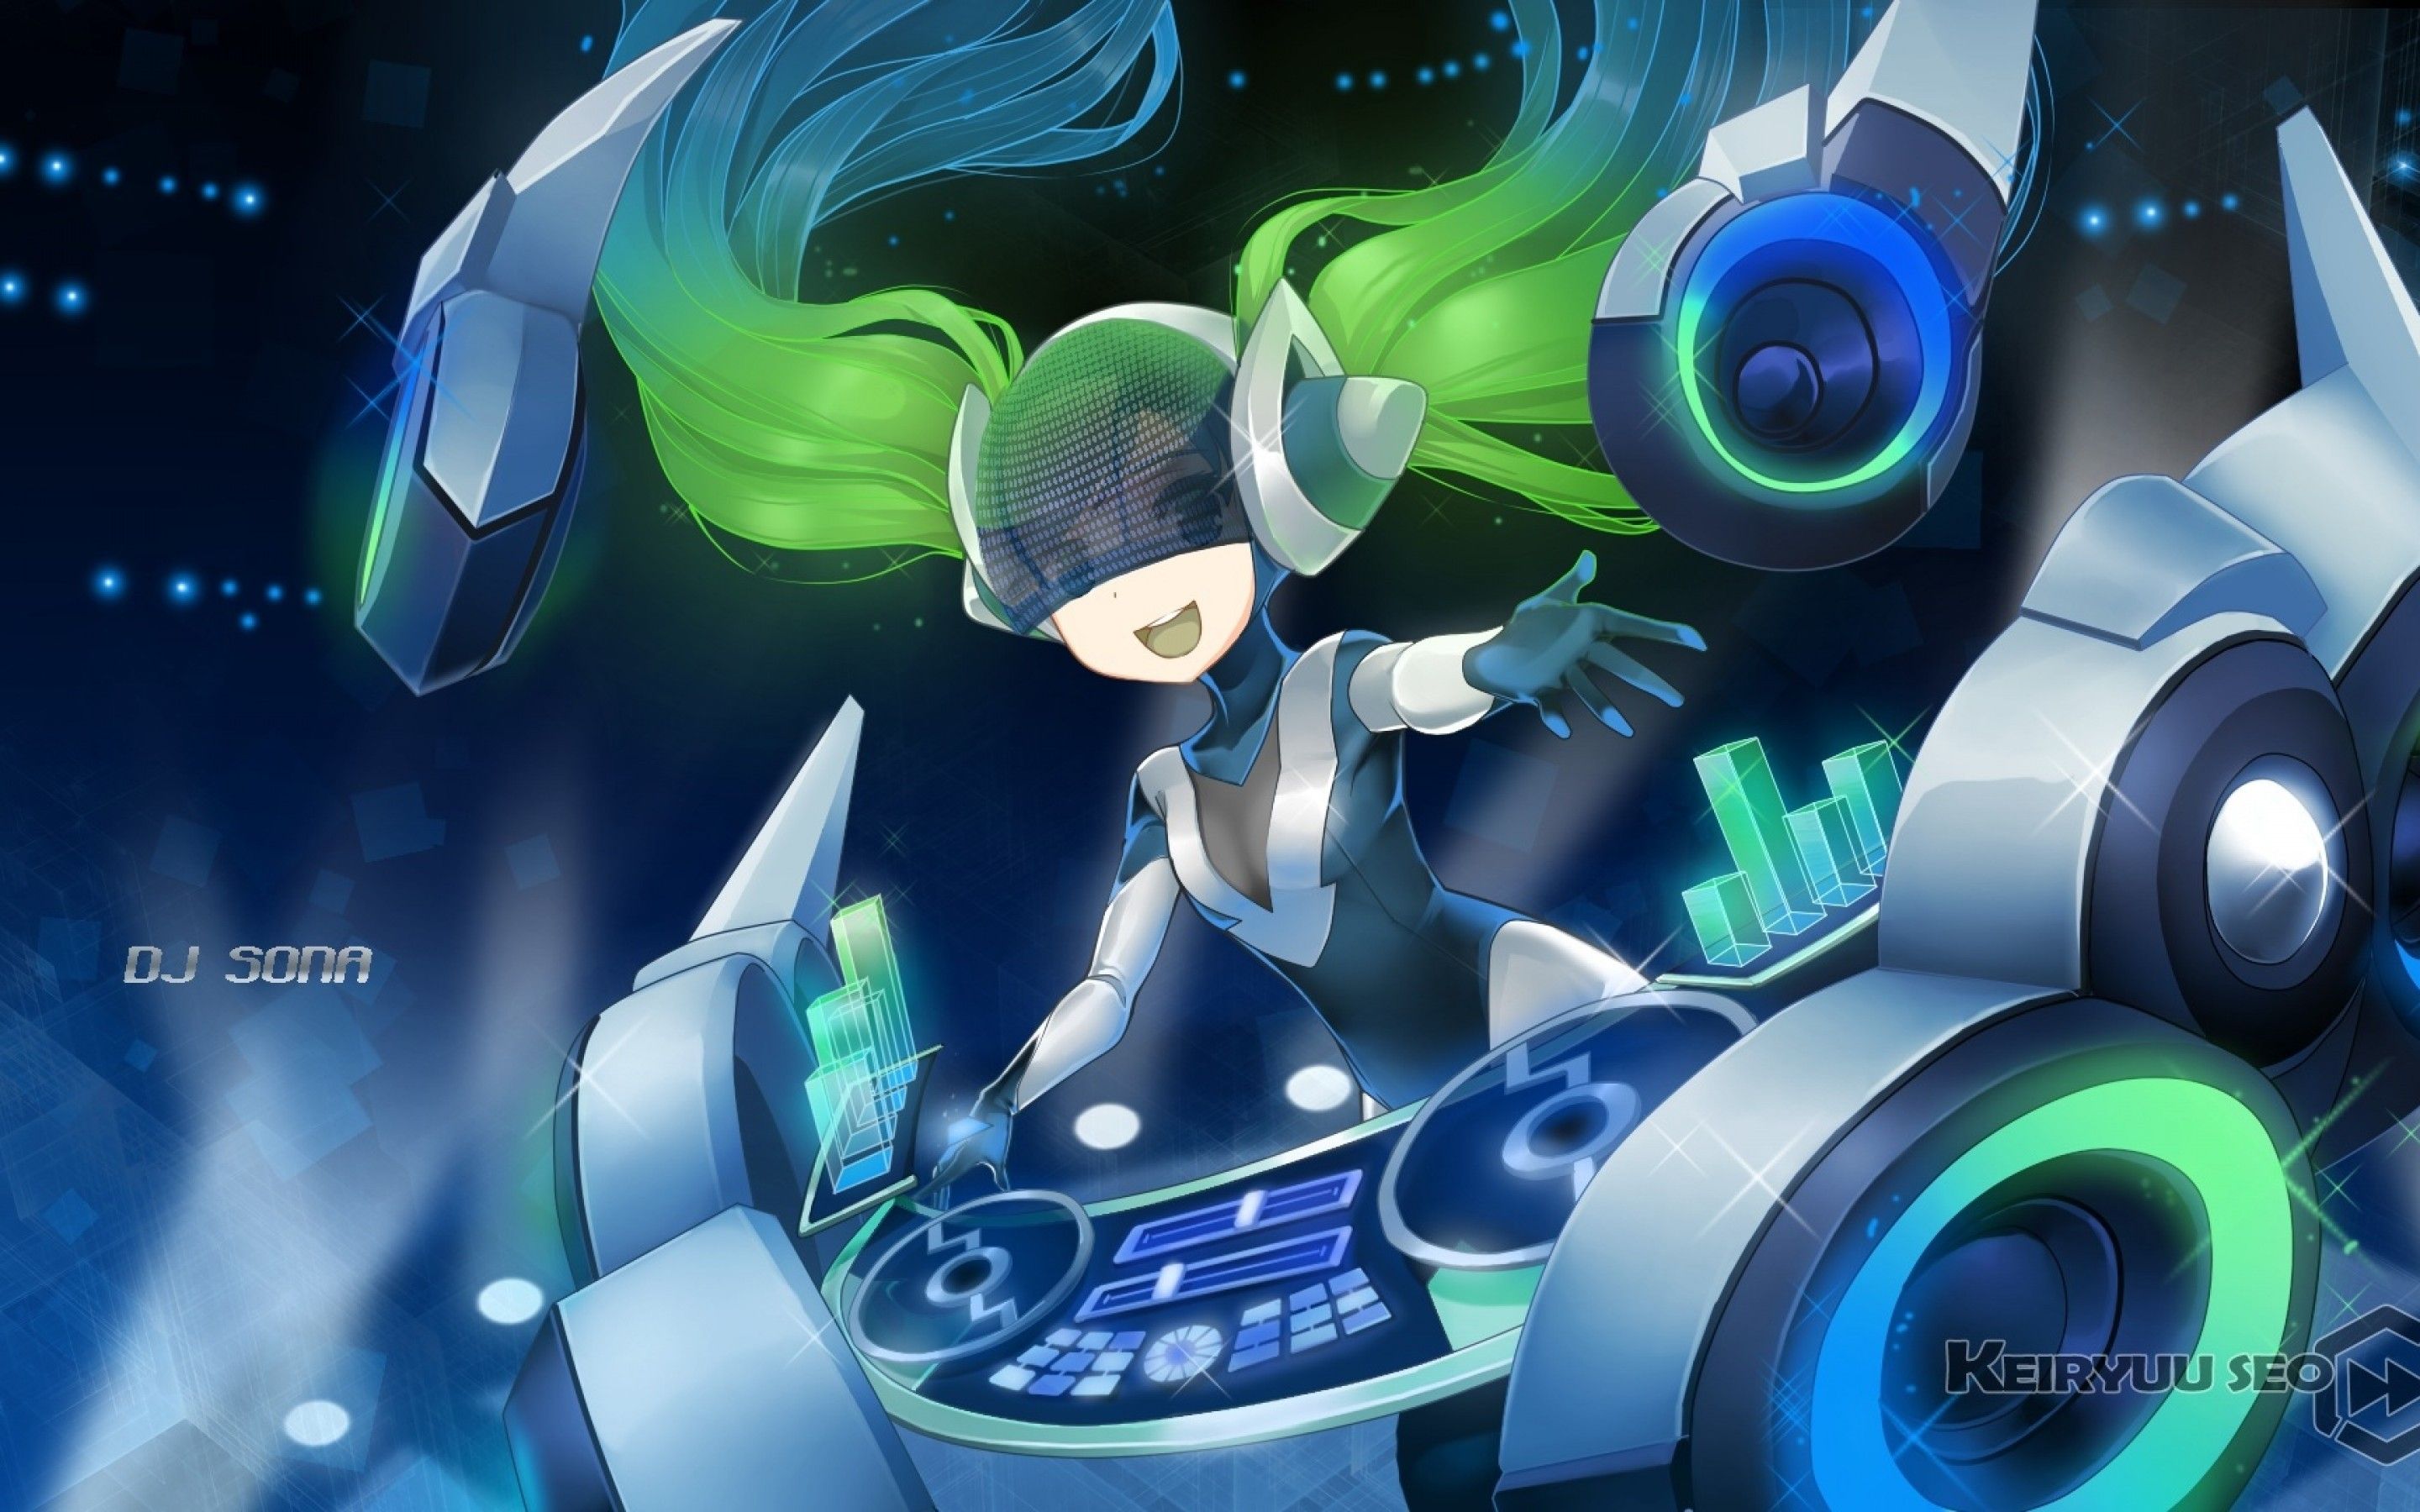 Download 2880x1800 Dj Sona, League Of Legends, Anime Style Wallpaper for MacBook Pro 15 inch